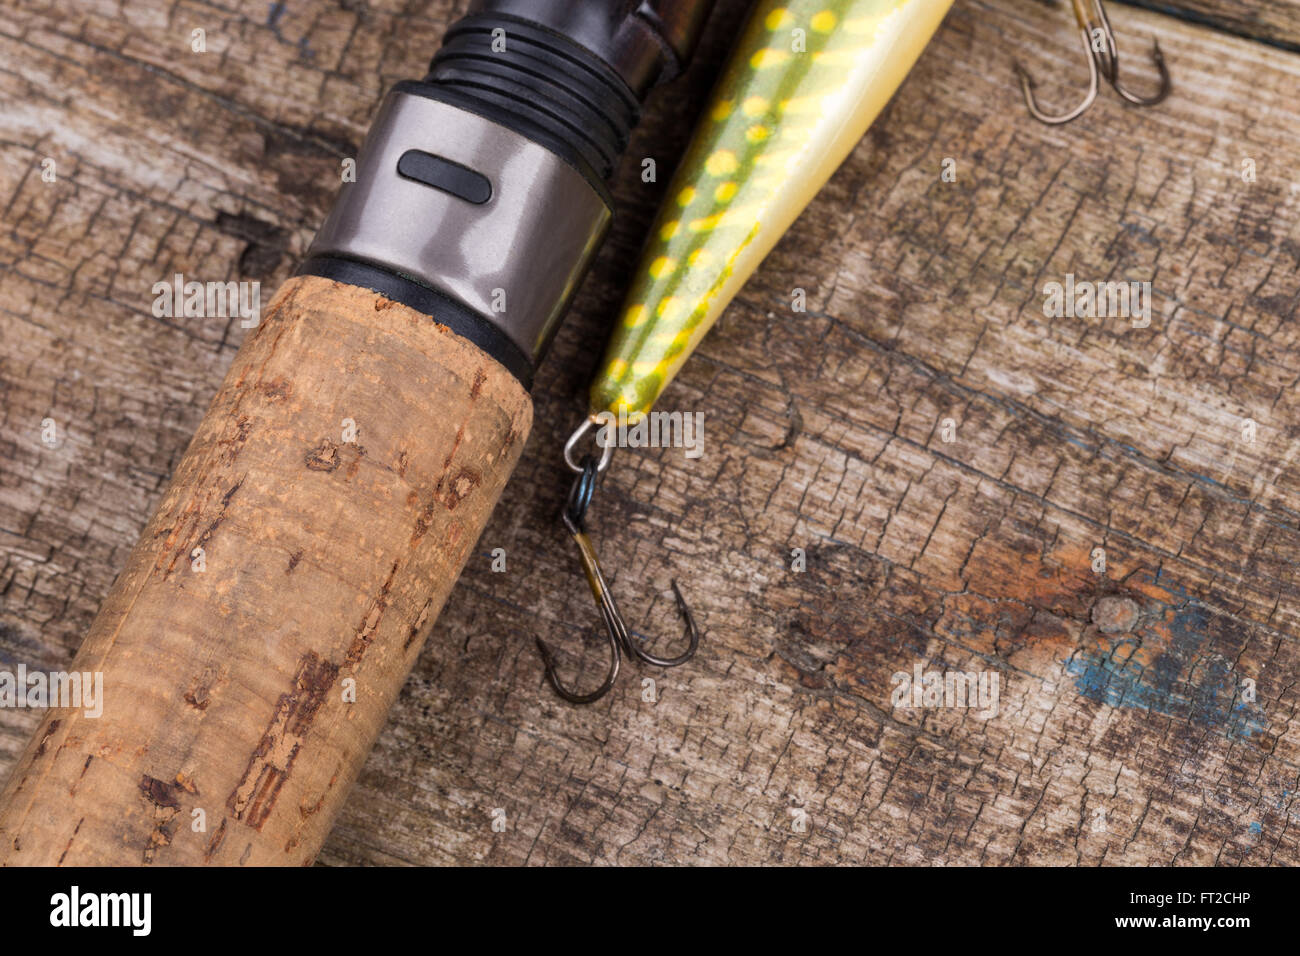 closeup cork handle of fishing rod with lure on wooden board